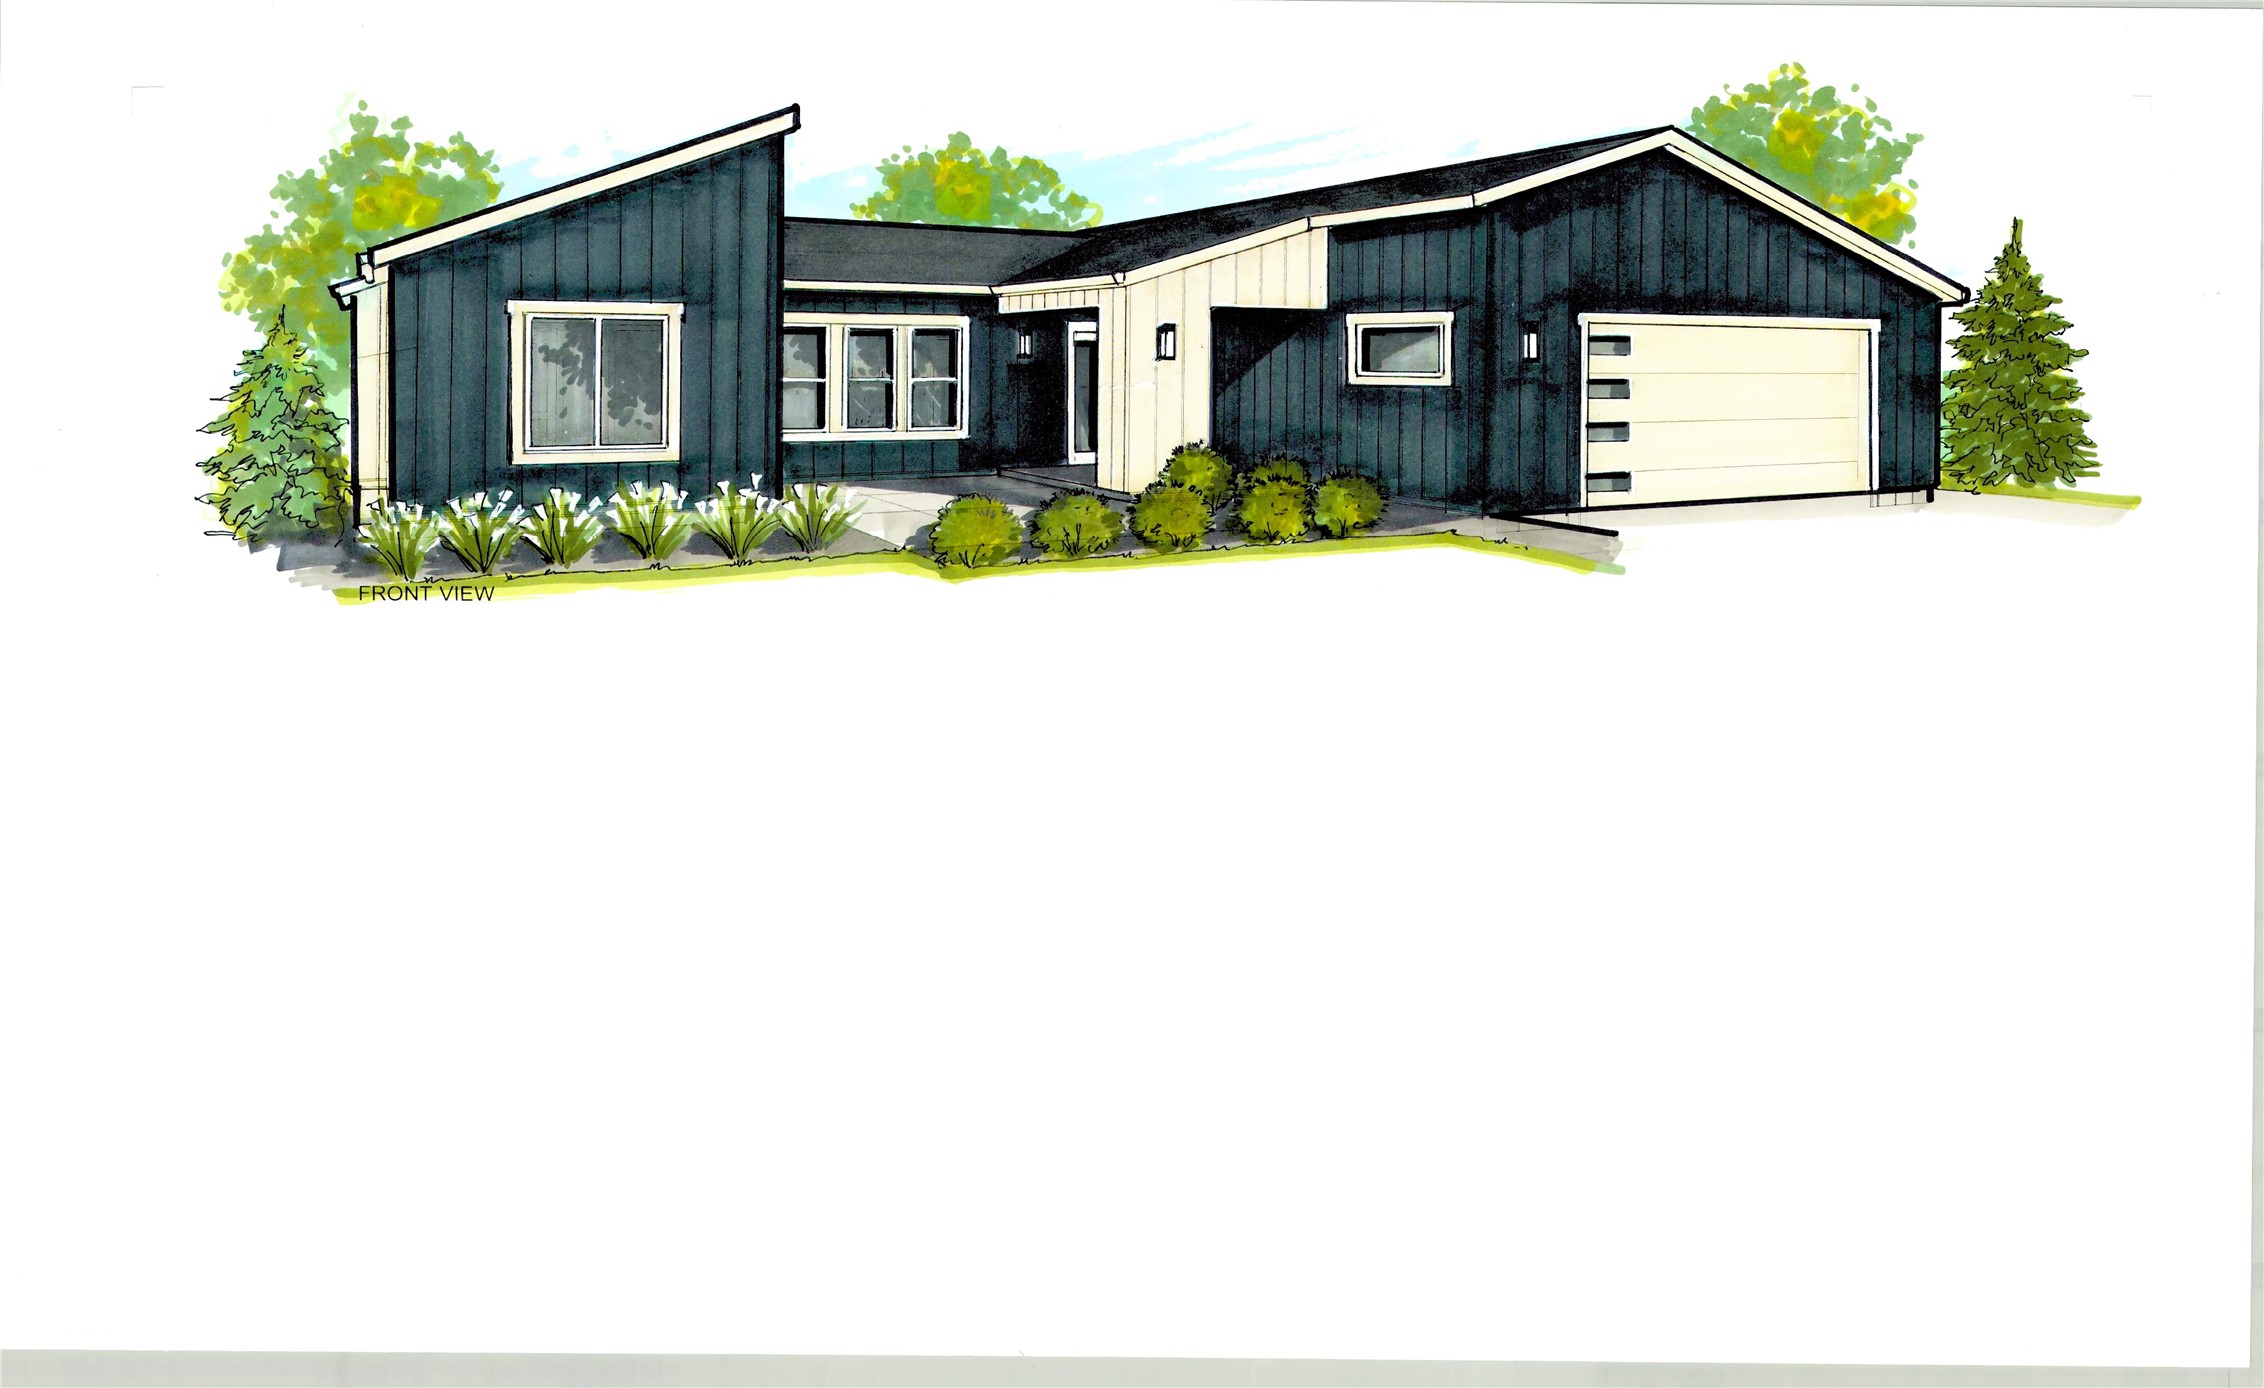 To be built mountain modern home in The Preserve Subdivision. Easy access to the bypass and only minutes from FVCC, Logan Health, and Kalispell's major shopping areas. This Dorado floor plan has 1,835 SF with 3 beds, 2 baths and attached two car garage. Open floor plan with lots of natural light. House has granite countertops, large island, vaulted ceilings, AC, covered porch, & underground sprinklers. Subdivision offers walking trails, dog park, and play ground all within close distance to the home. Contact Cecil Waatti 406.890.4000 Layne Massie 406.270.6664 or your real estate professional.